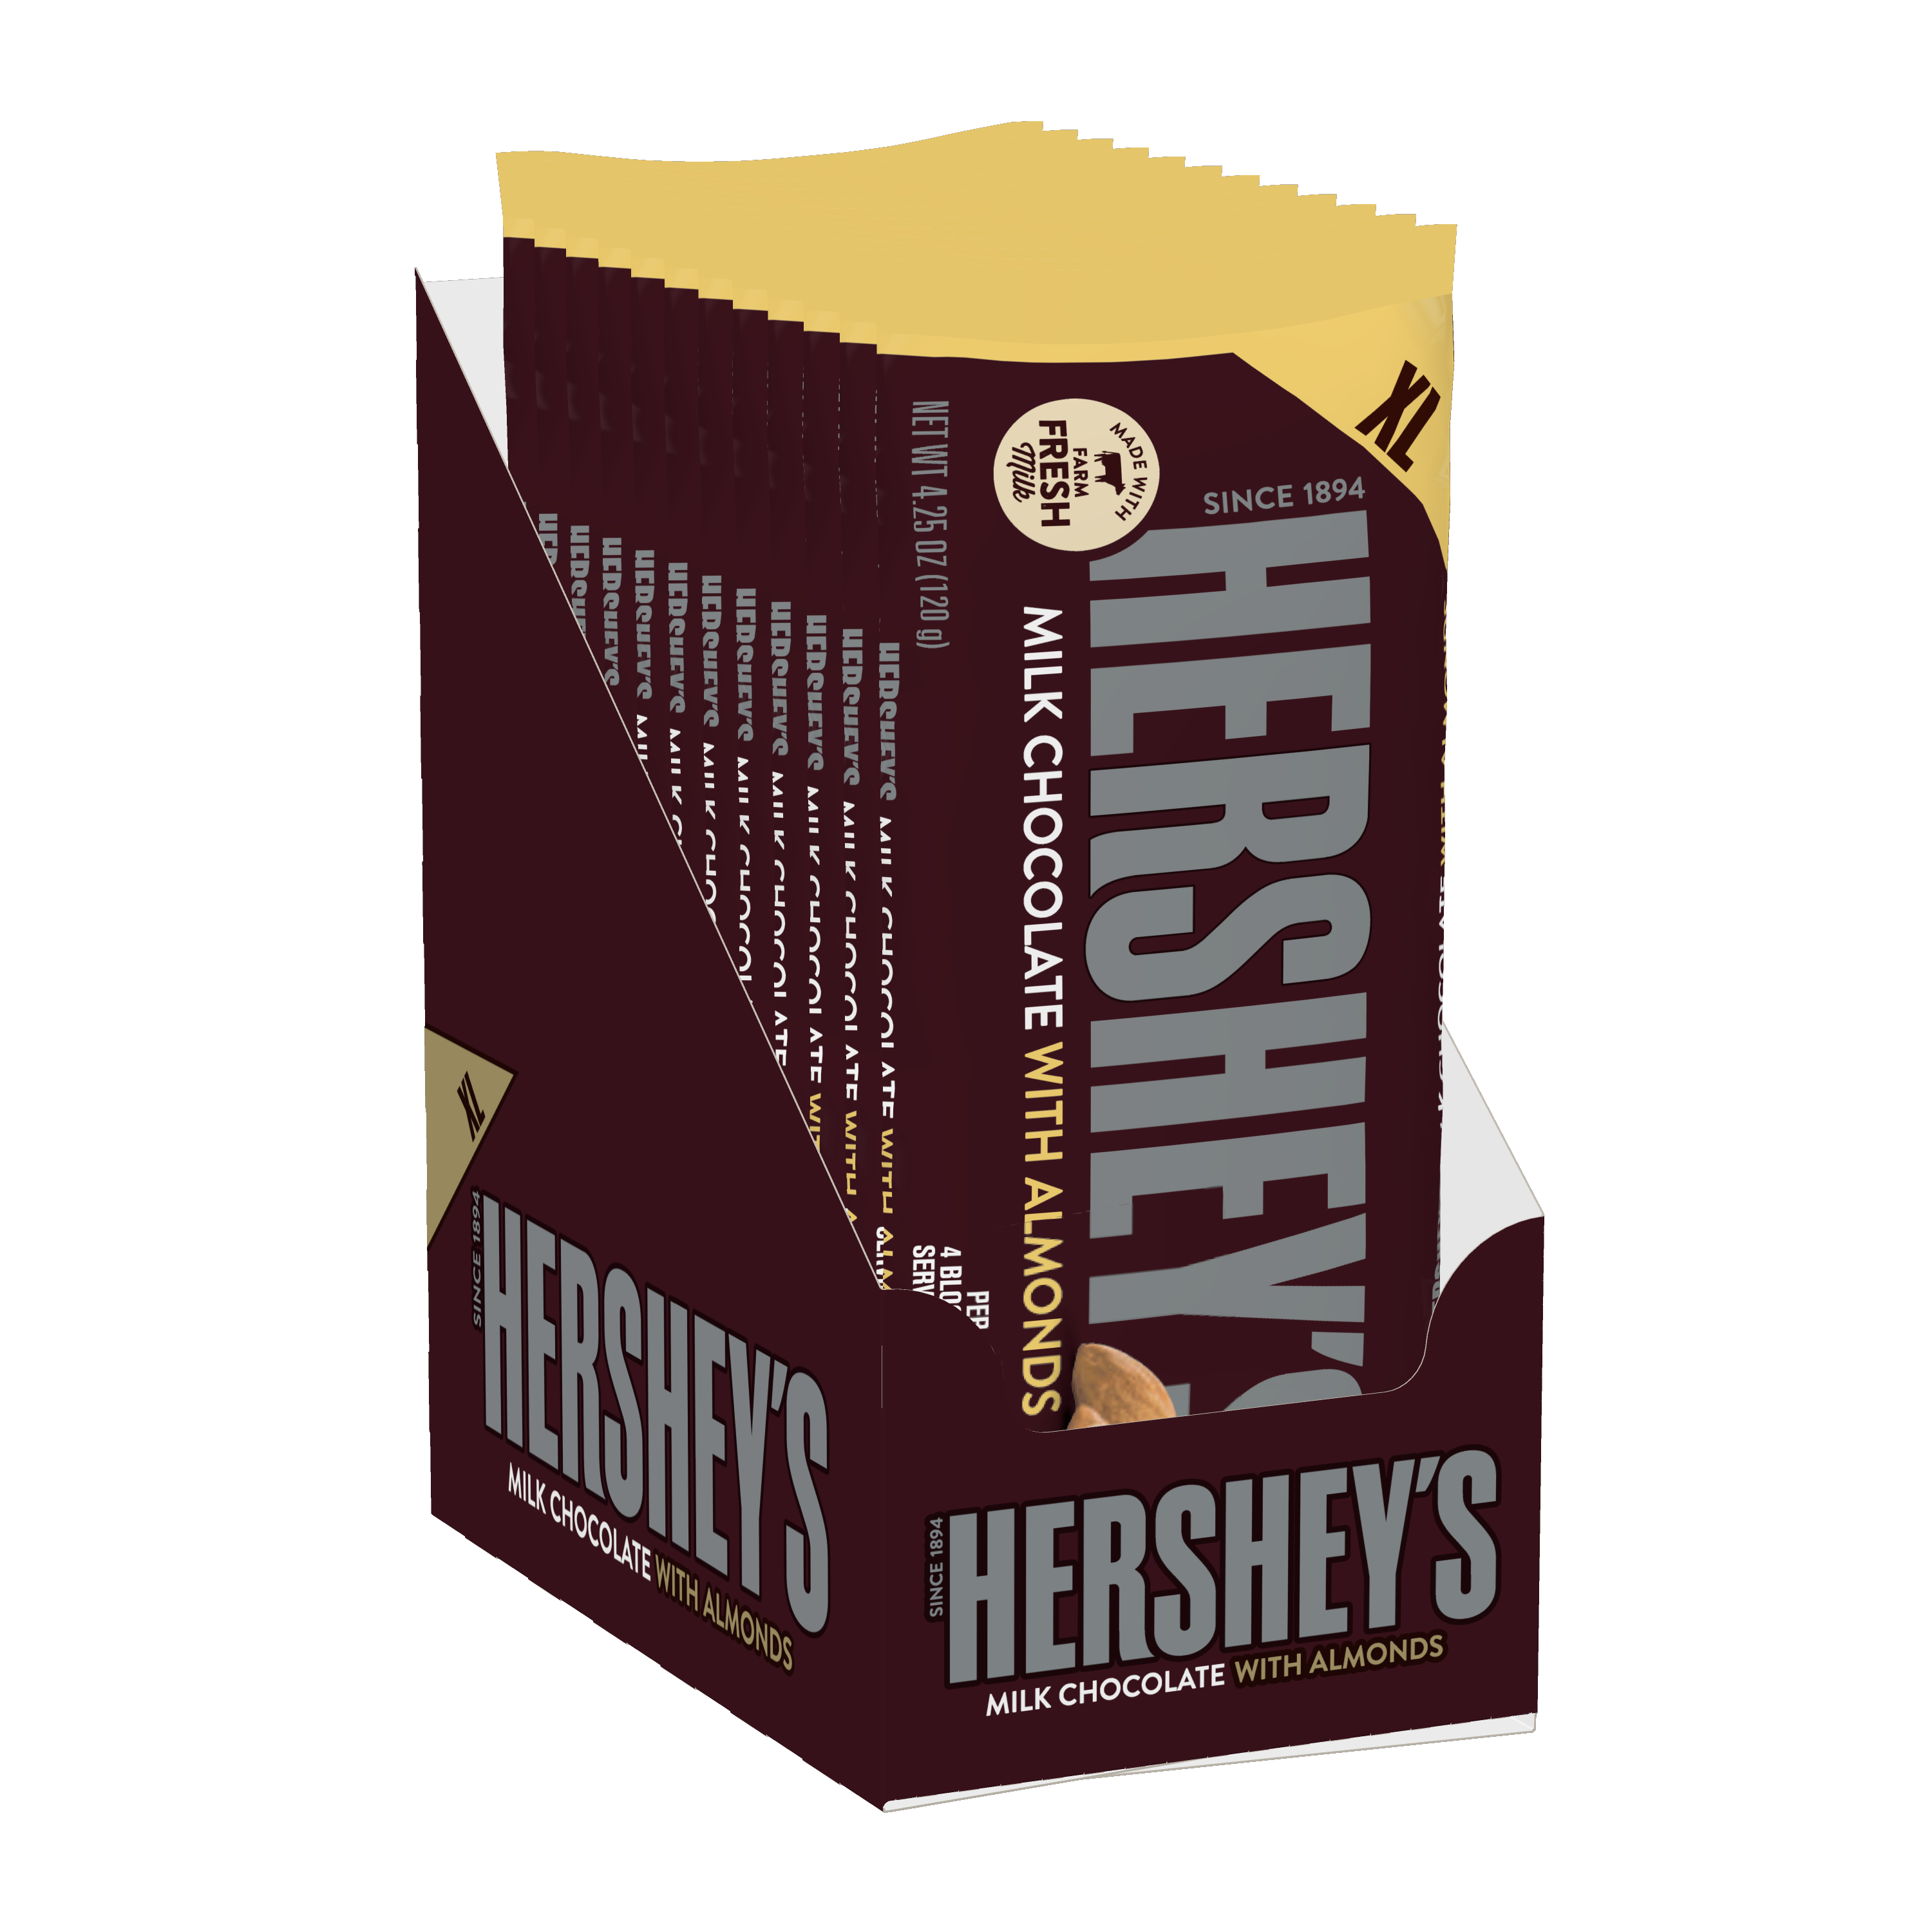 HERSHEY'S Milk Chocolate with Almonds XL Candy Bars, 4.25 oz, 12 pack - Left Side of Package